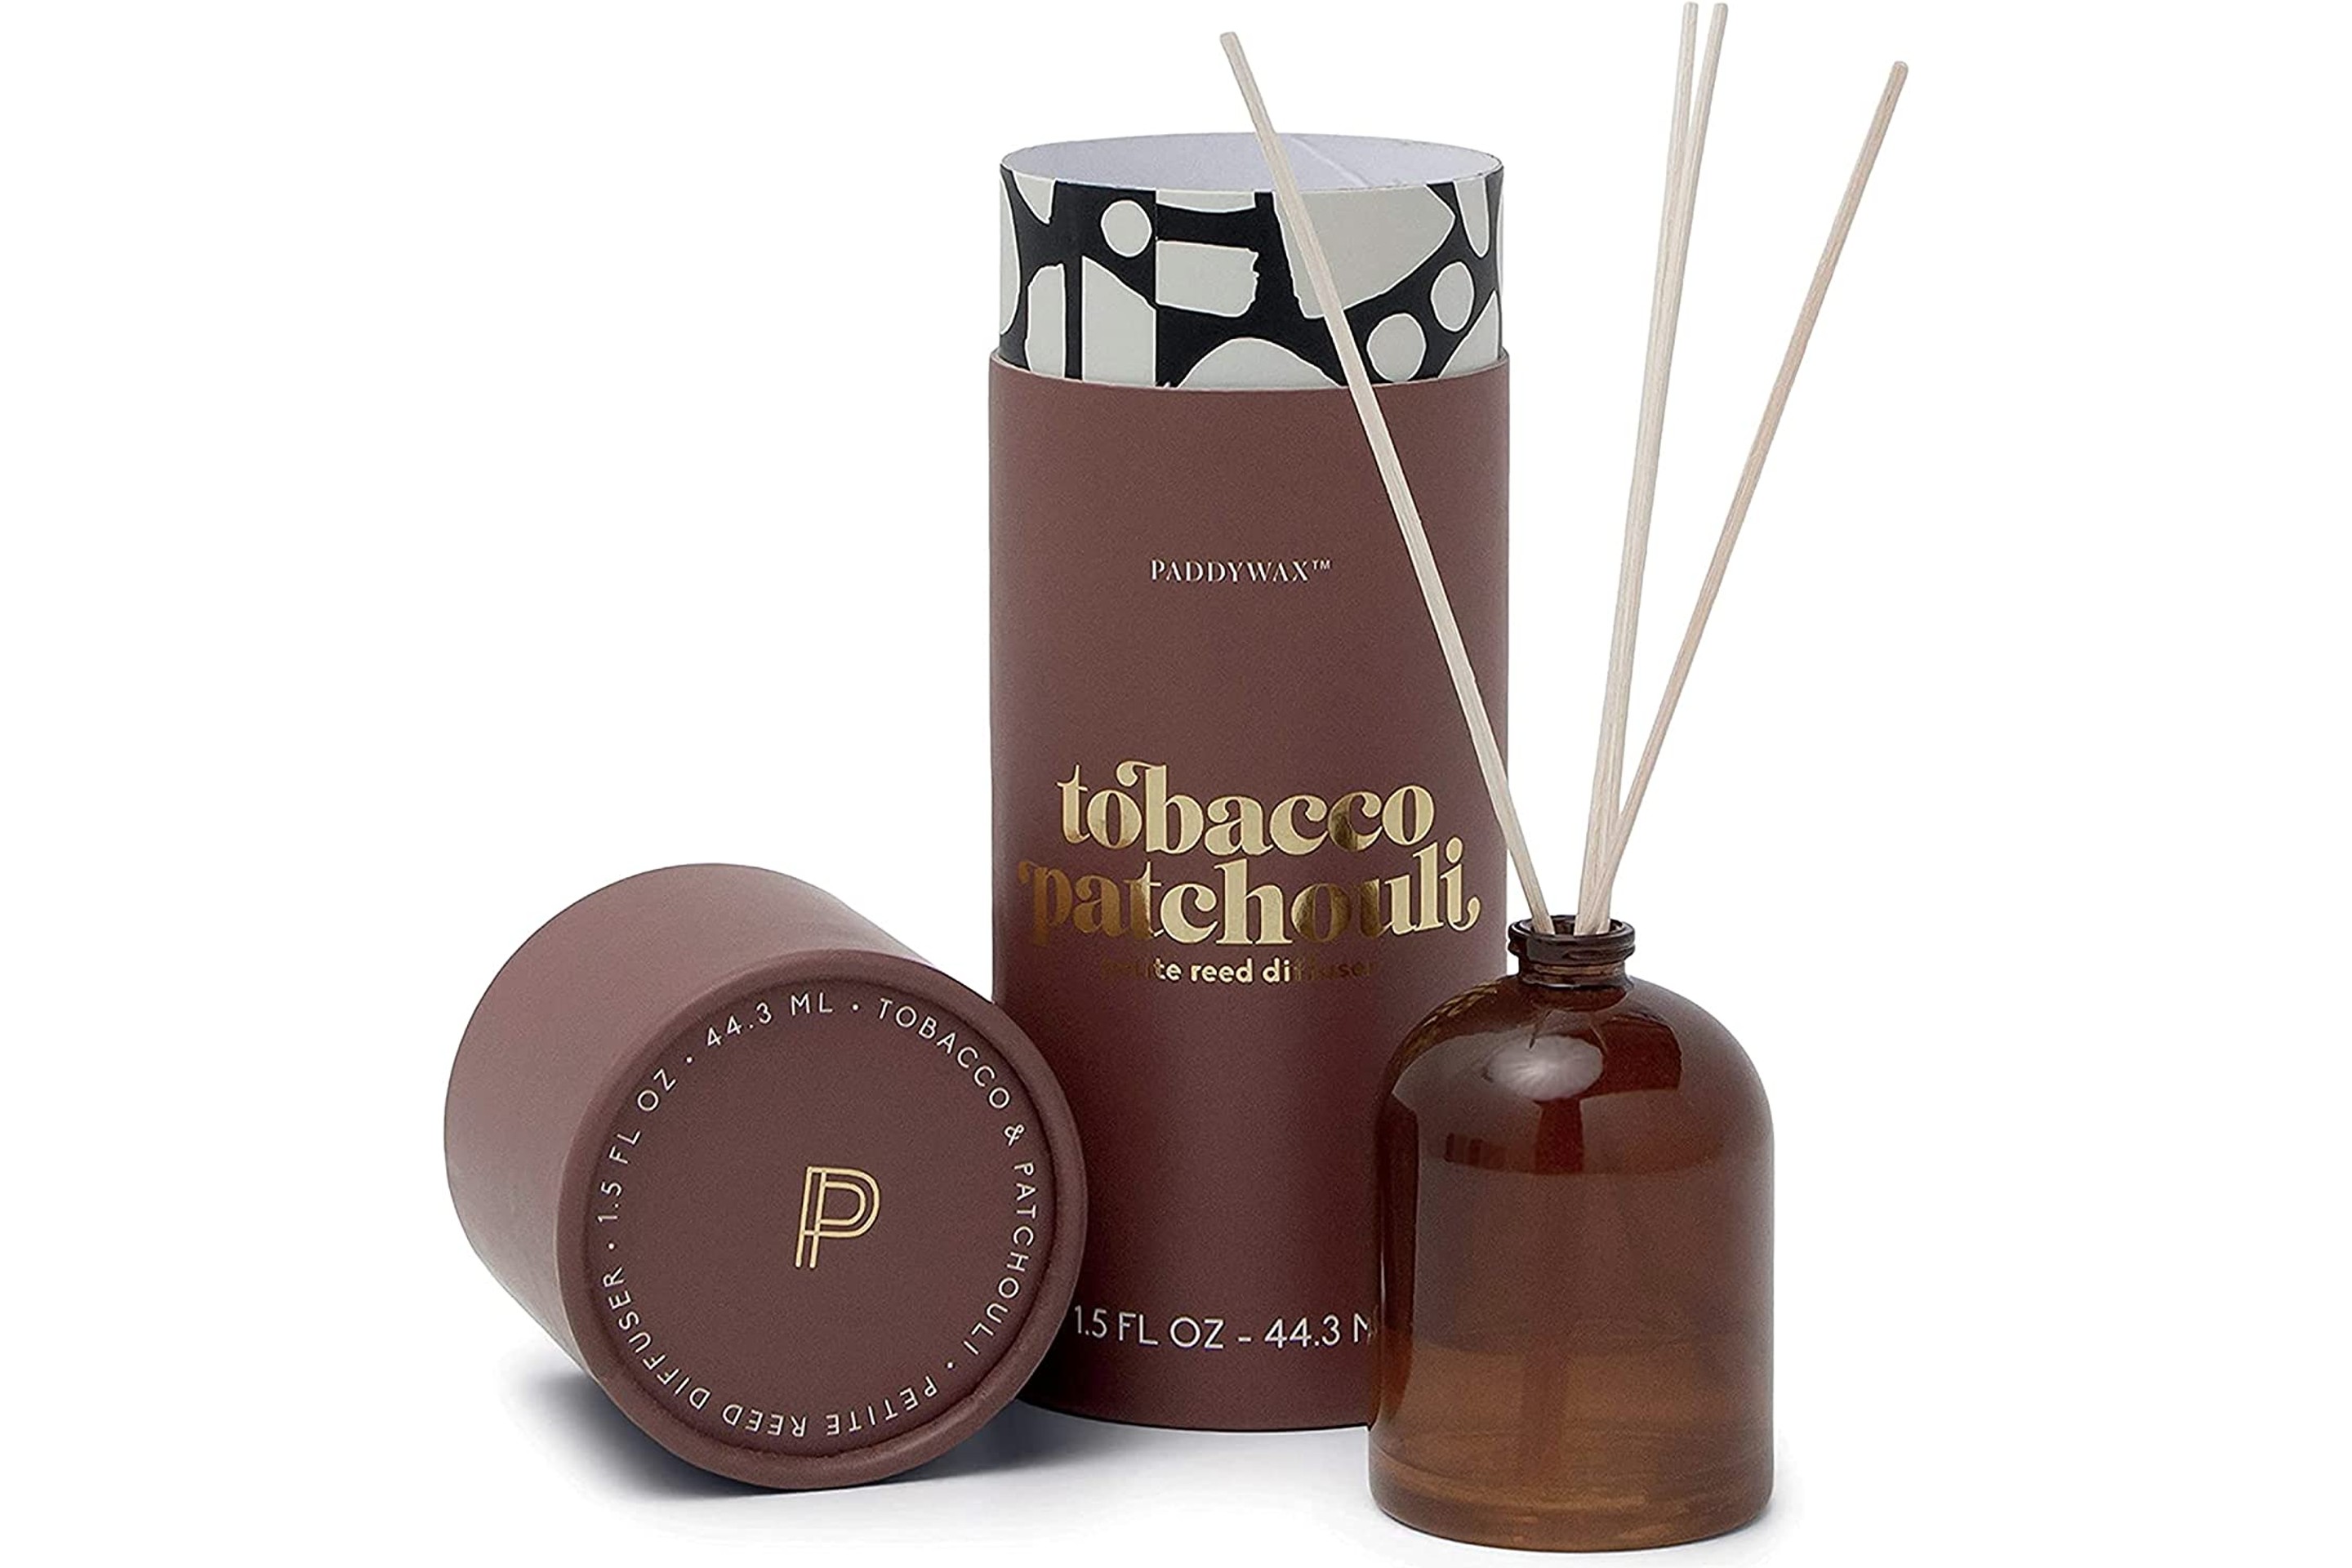 Paddywax Petite Collection Reed Diffuser